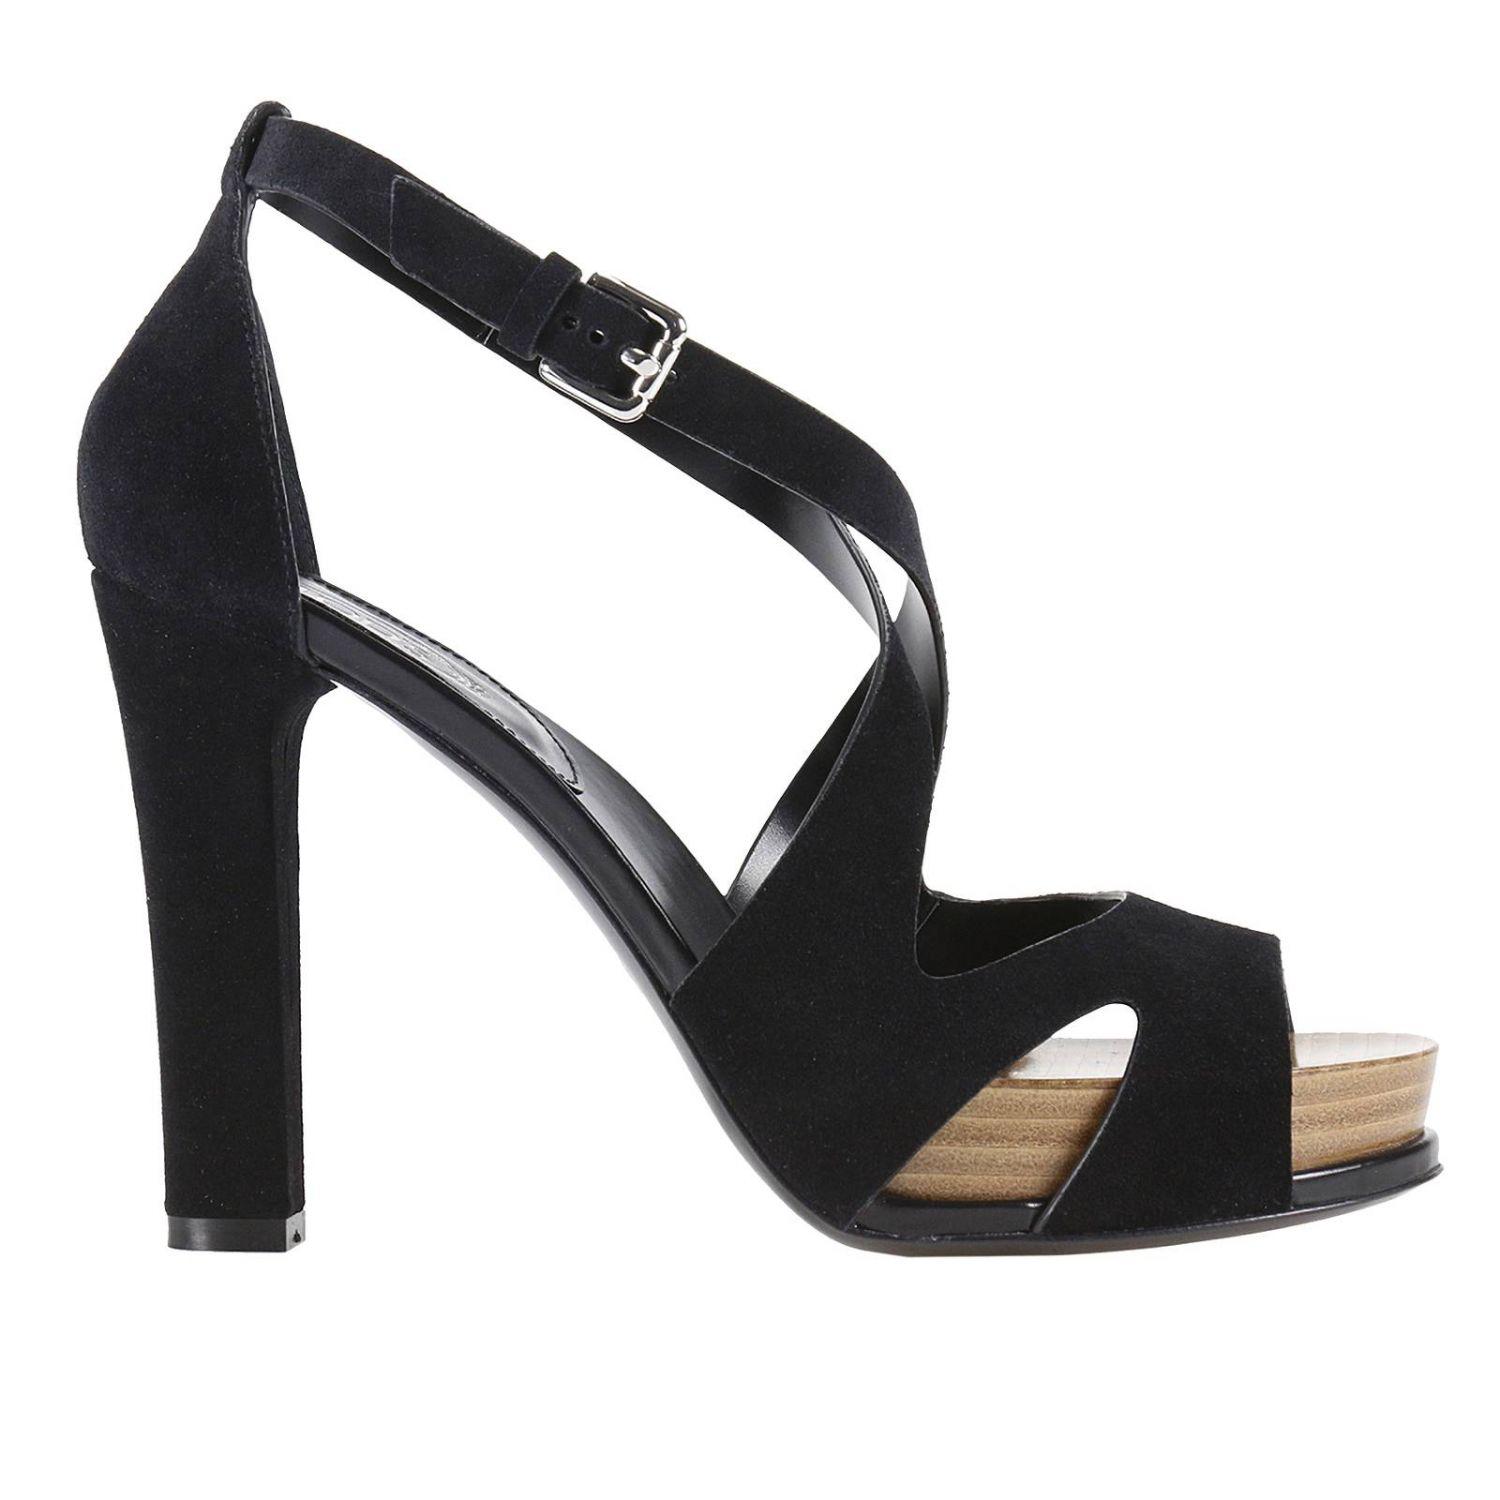 Lyst - Tod'S Heeled Sandals Shoes Women in Black